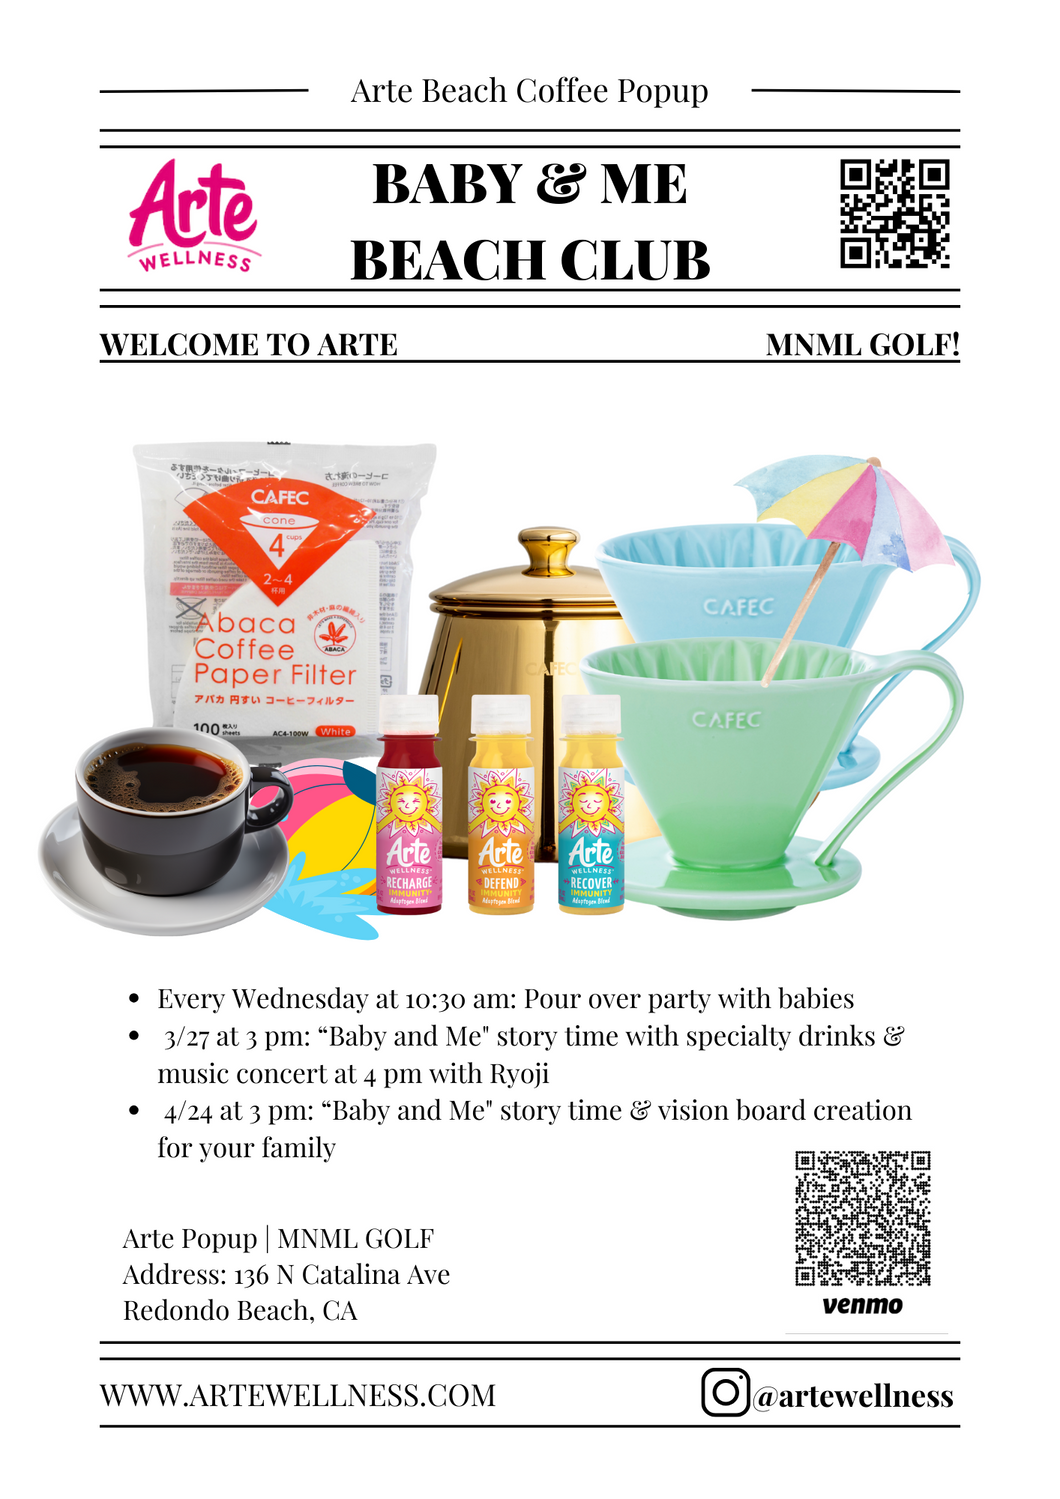 Baby & Me Beach Club at 10:30 am every Wednesday